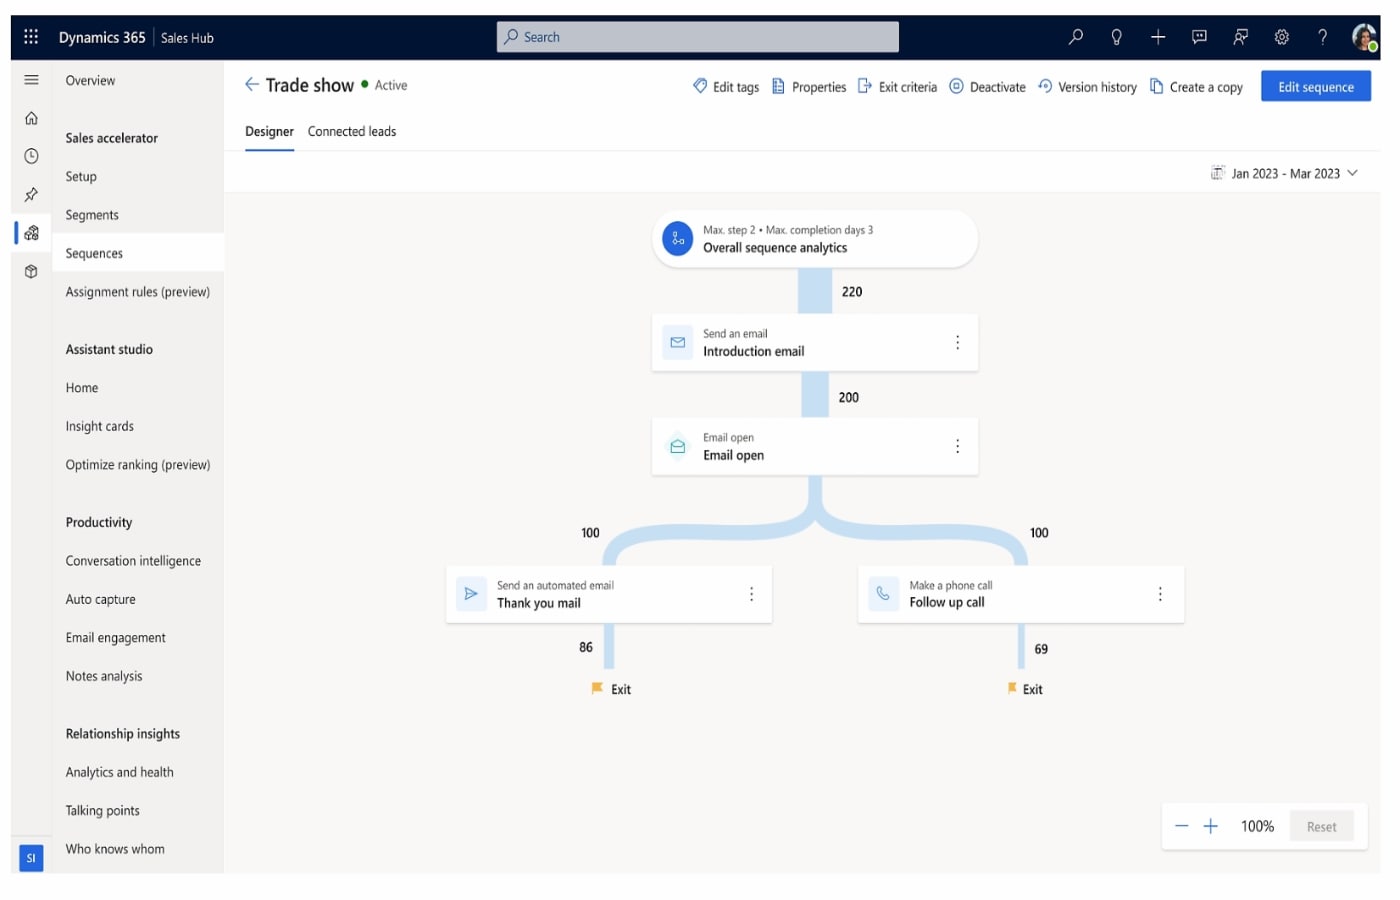 Example of sales sequence in Dynamics 365 Sales.